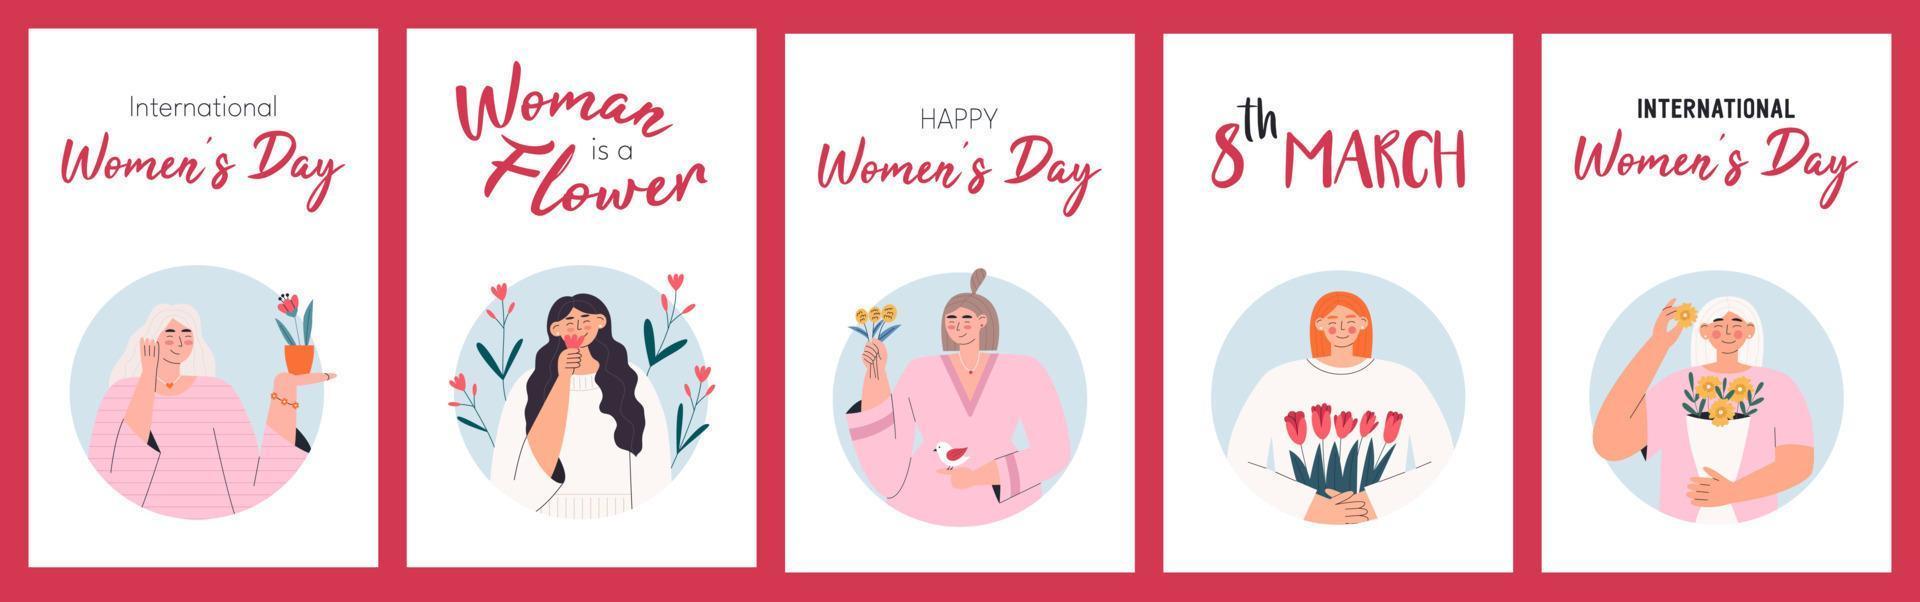 Greeting cards for international women s day vector